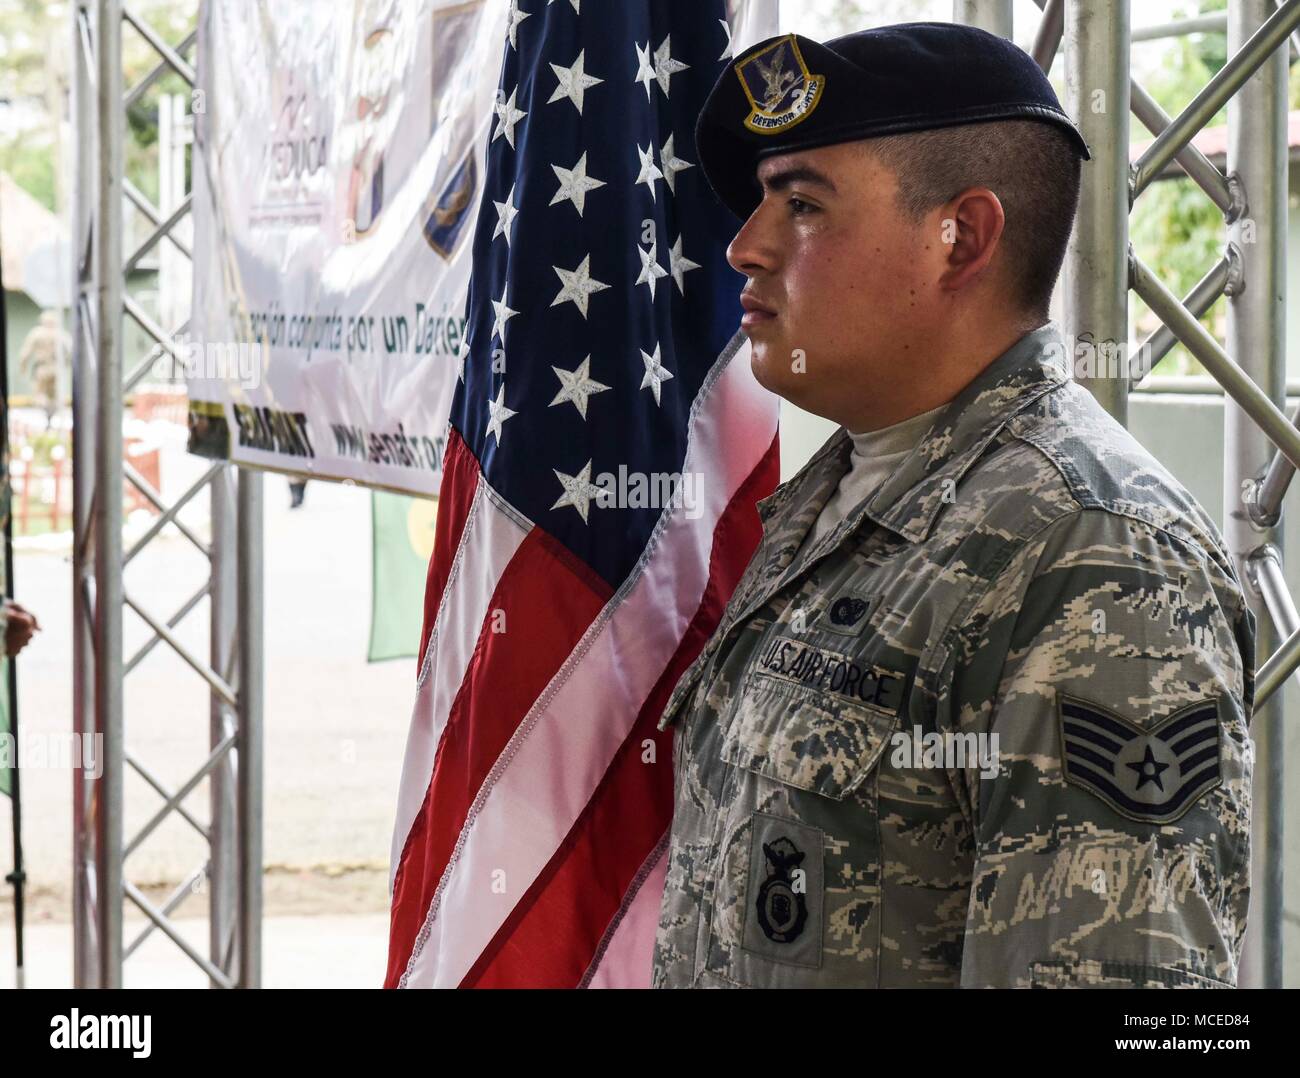 U.S. Air Force Staff Sgt. Ruben Virgen, 346th Air Expeditionary Group security forces member, deployed from Tucson, Ariz., stands next to a U.S. flag during the opening ceremony of Exercise New Horizons 2018, April 11, 2018 in Meteti, Panama. Exercise New Horizons is a joint-service training exercise, focused on enhancing relations with partner nations and providing aid to local communities while providing training U.S. military members. During the exercise, U.S. military members will build three schools, one community center and a women’s health ward in the Meteti area. They will also work cl Stock Photo